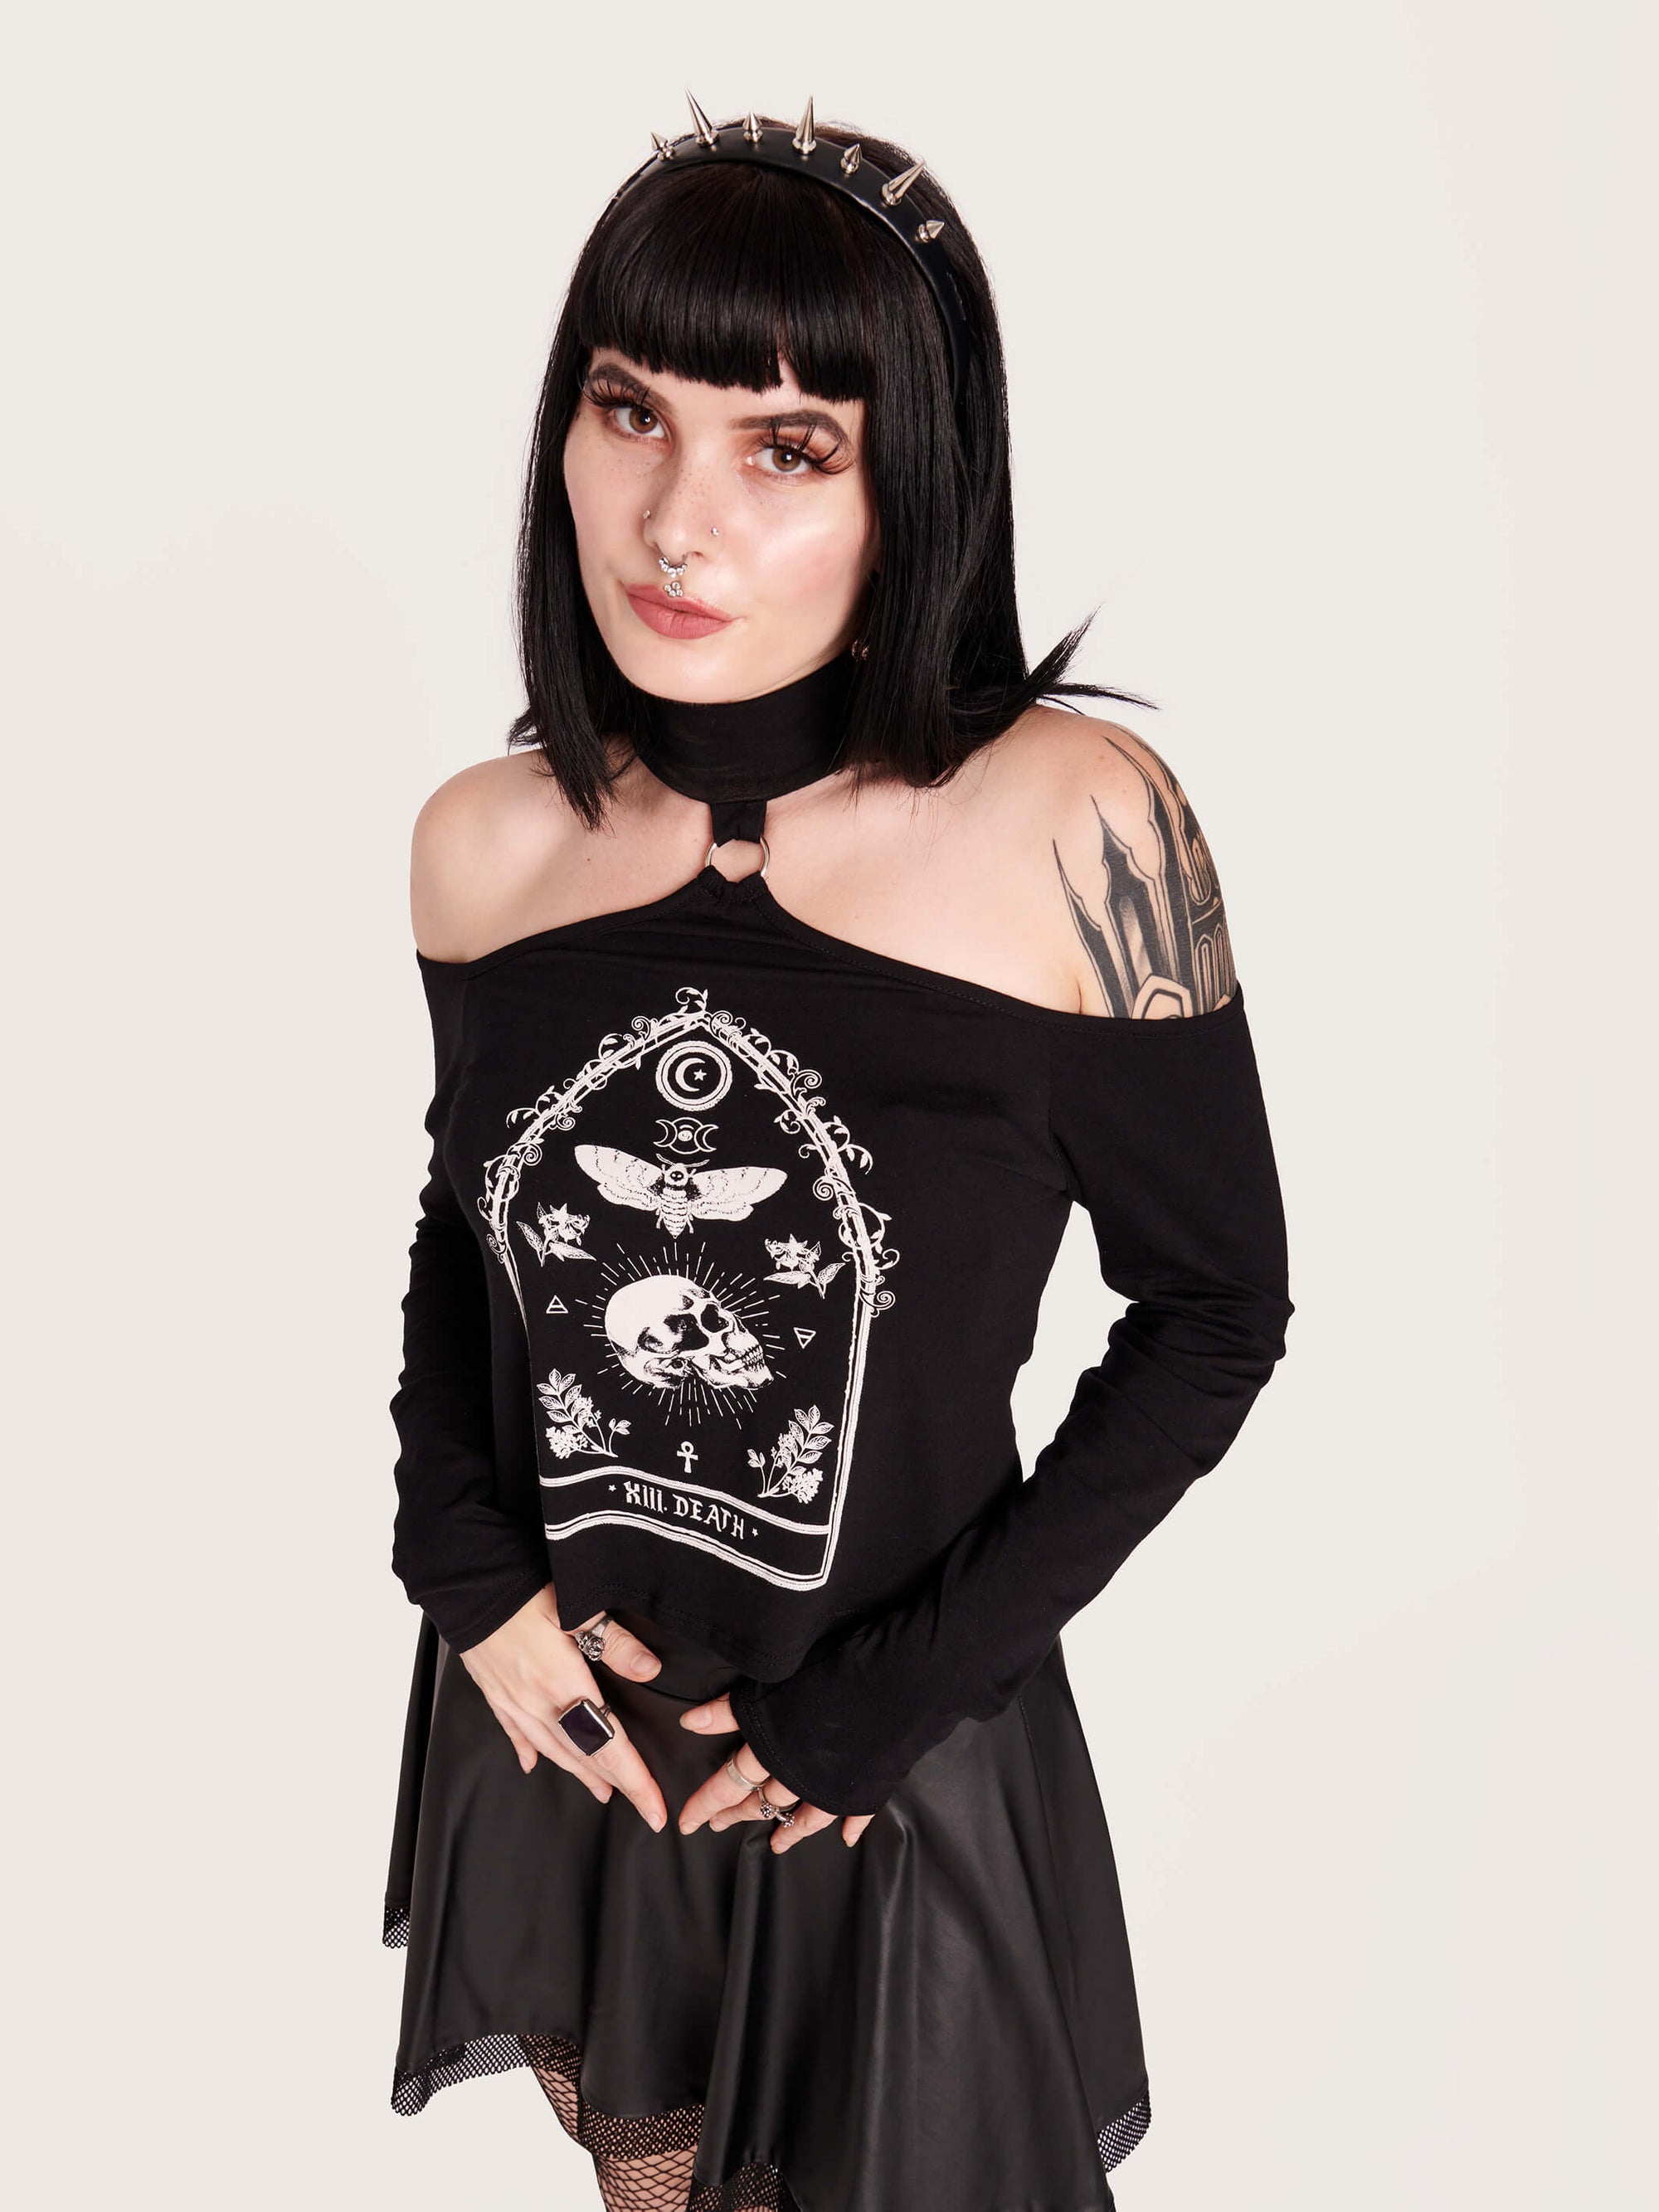  off the shoulder top with mock neck and metal o-ring details. Featuring Death tarot card art.